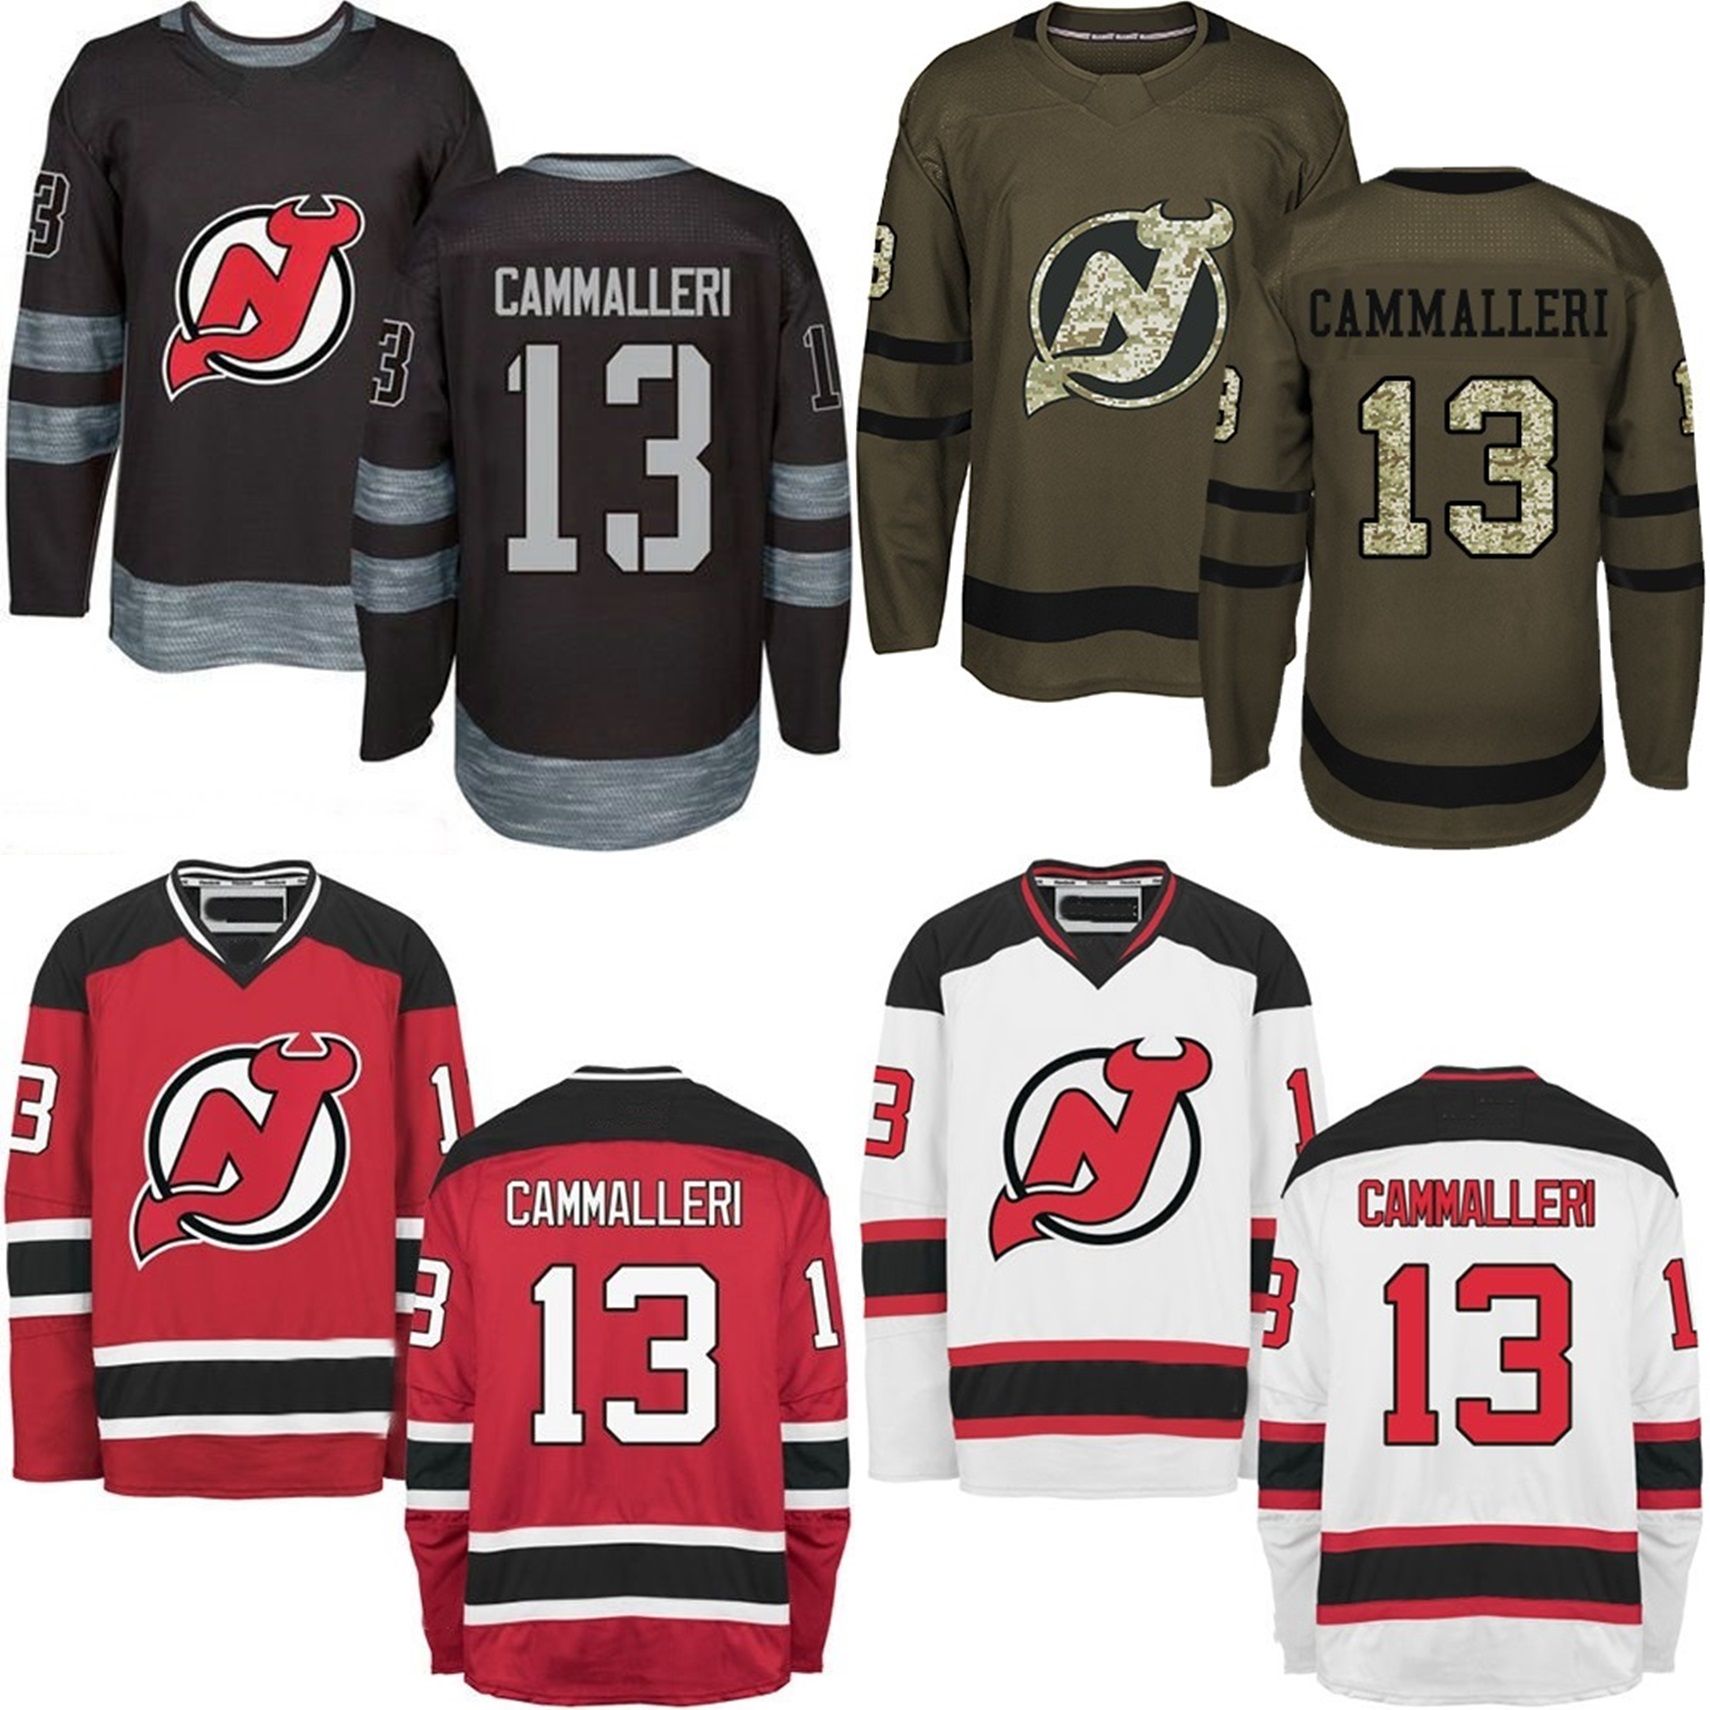 devils red and green jersey